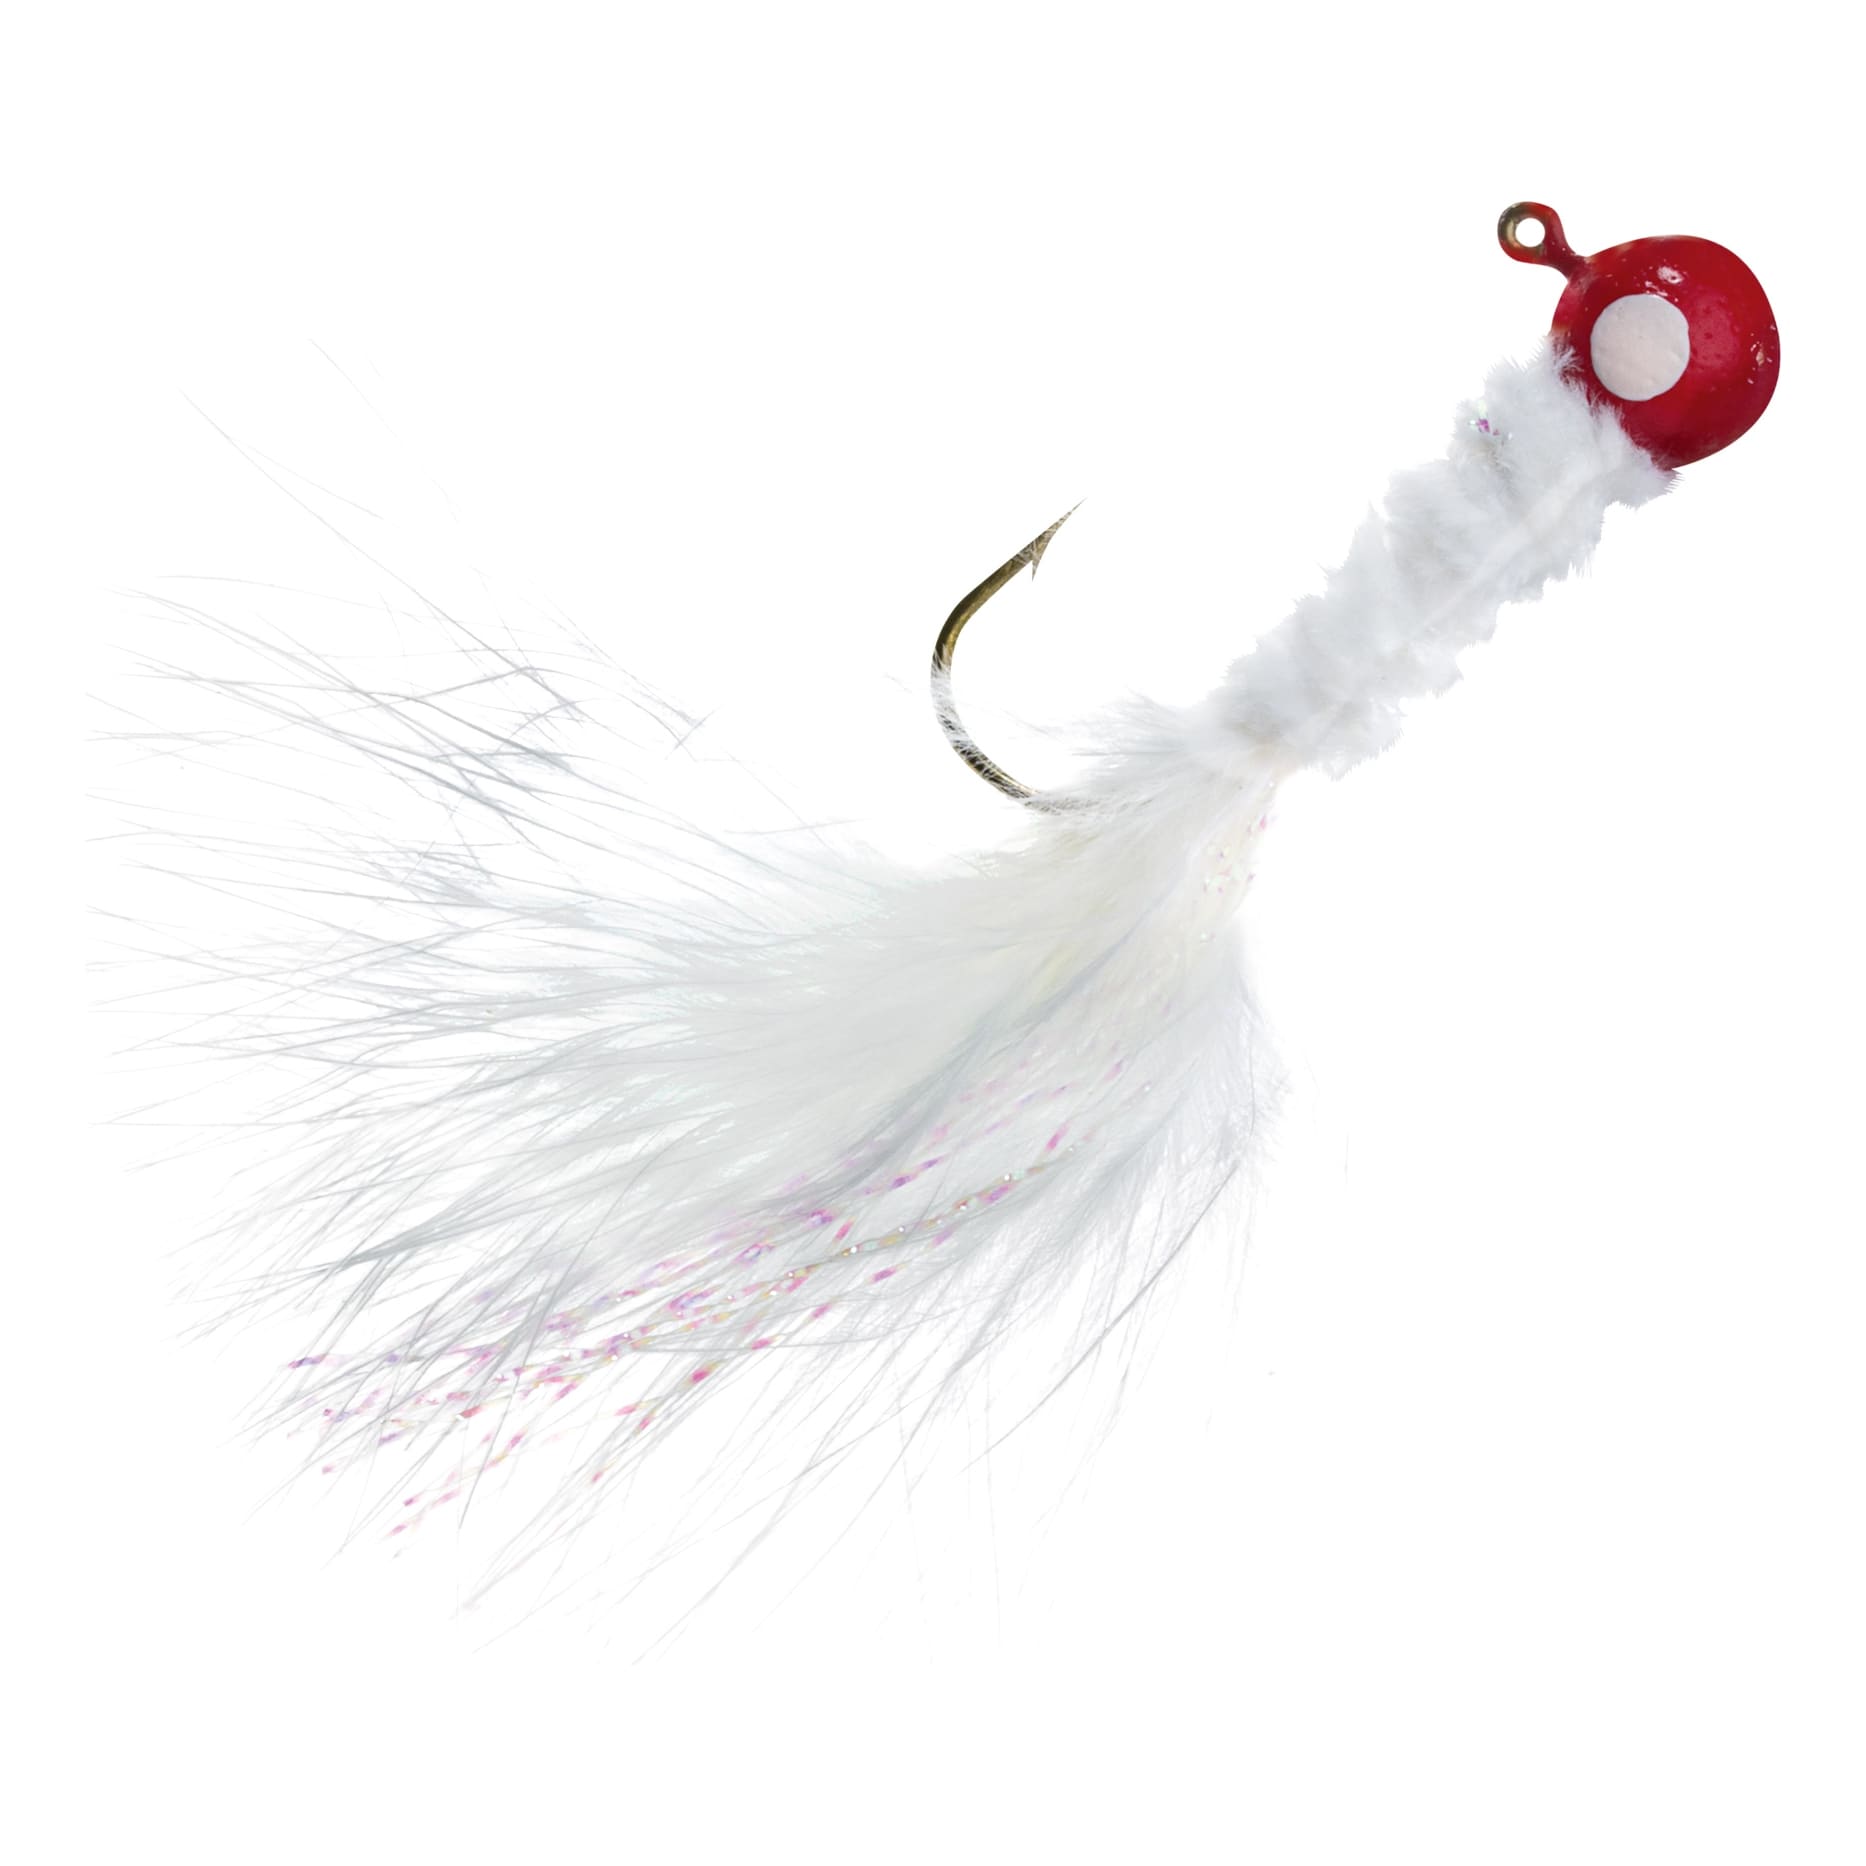 Bass Pro Shops® Marabou Tinsel Crappie Jig - Red White